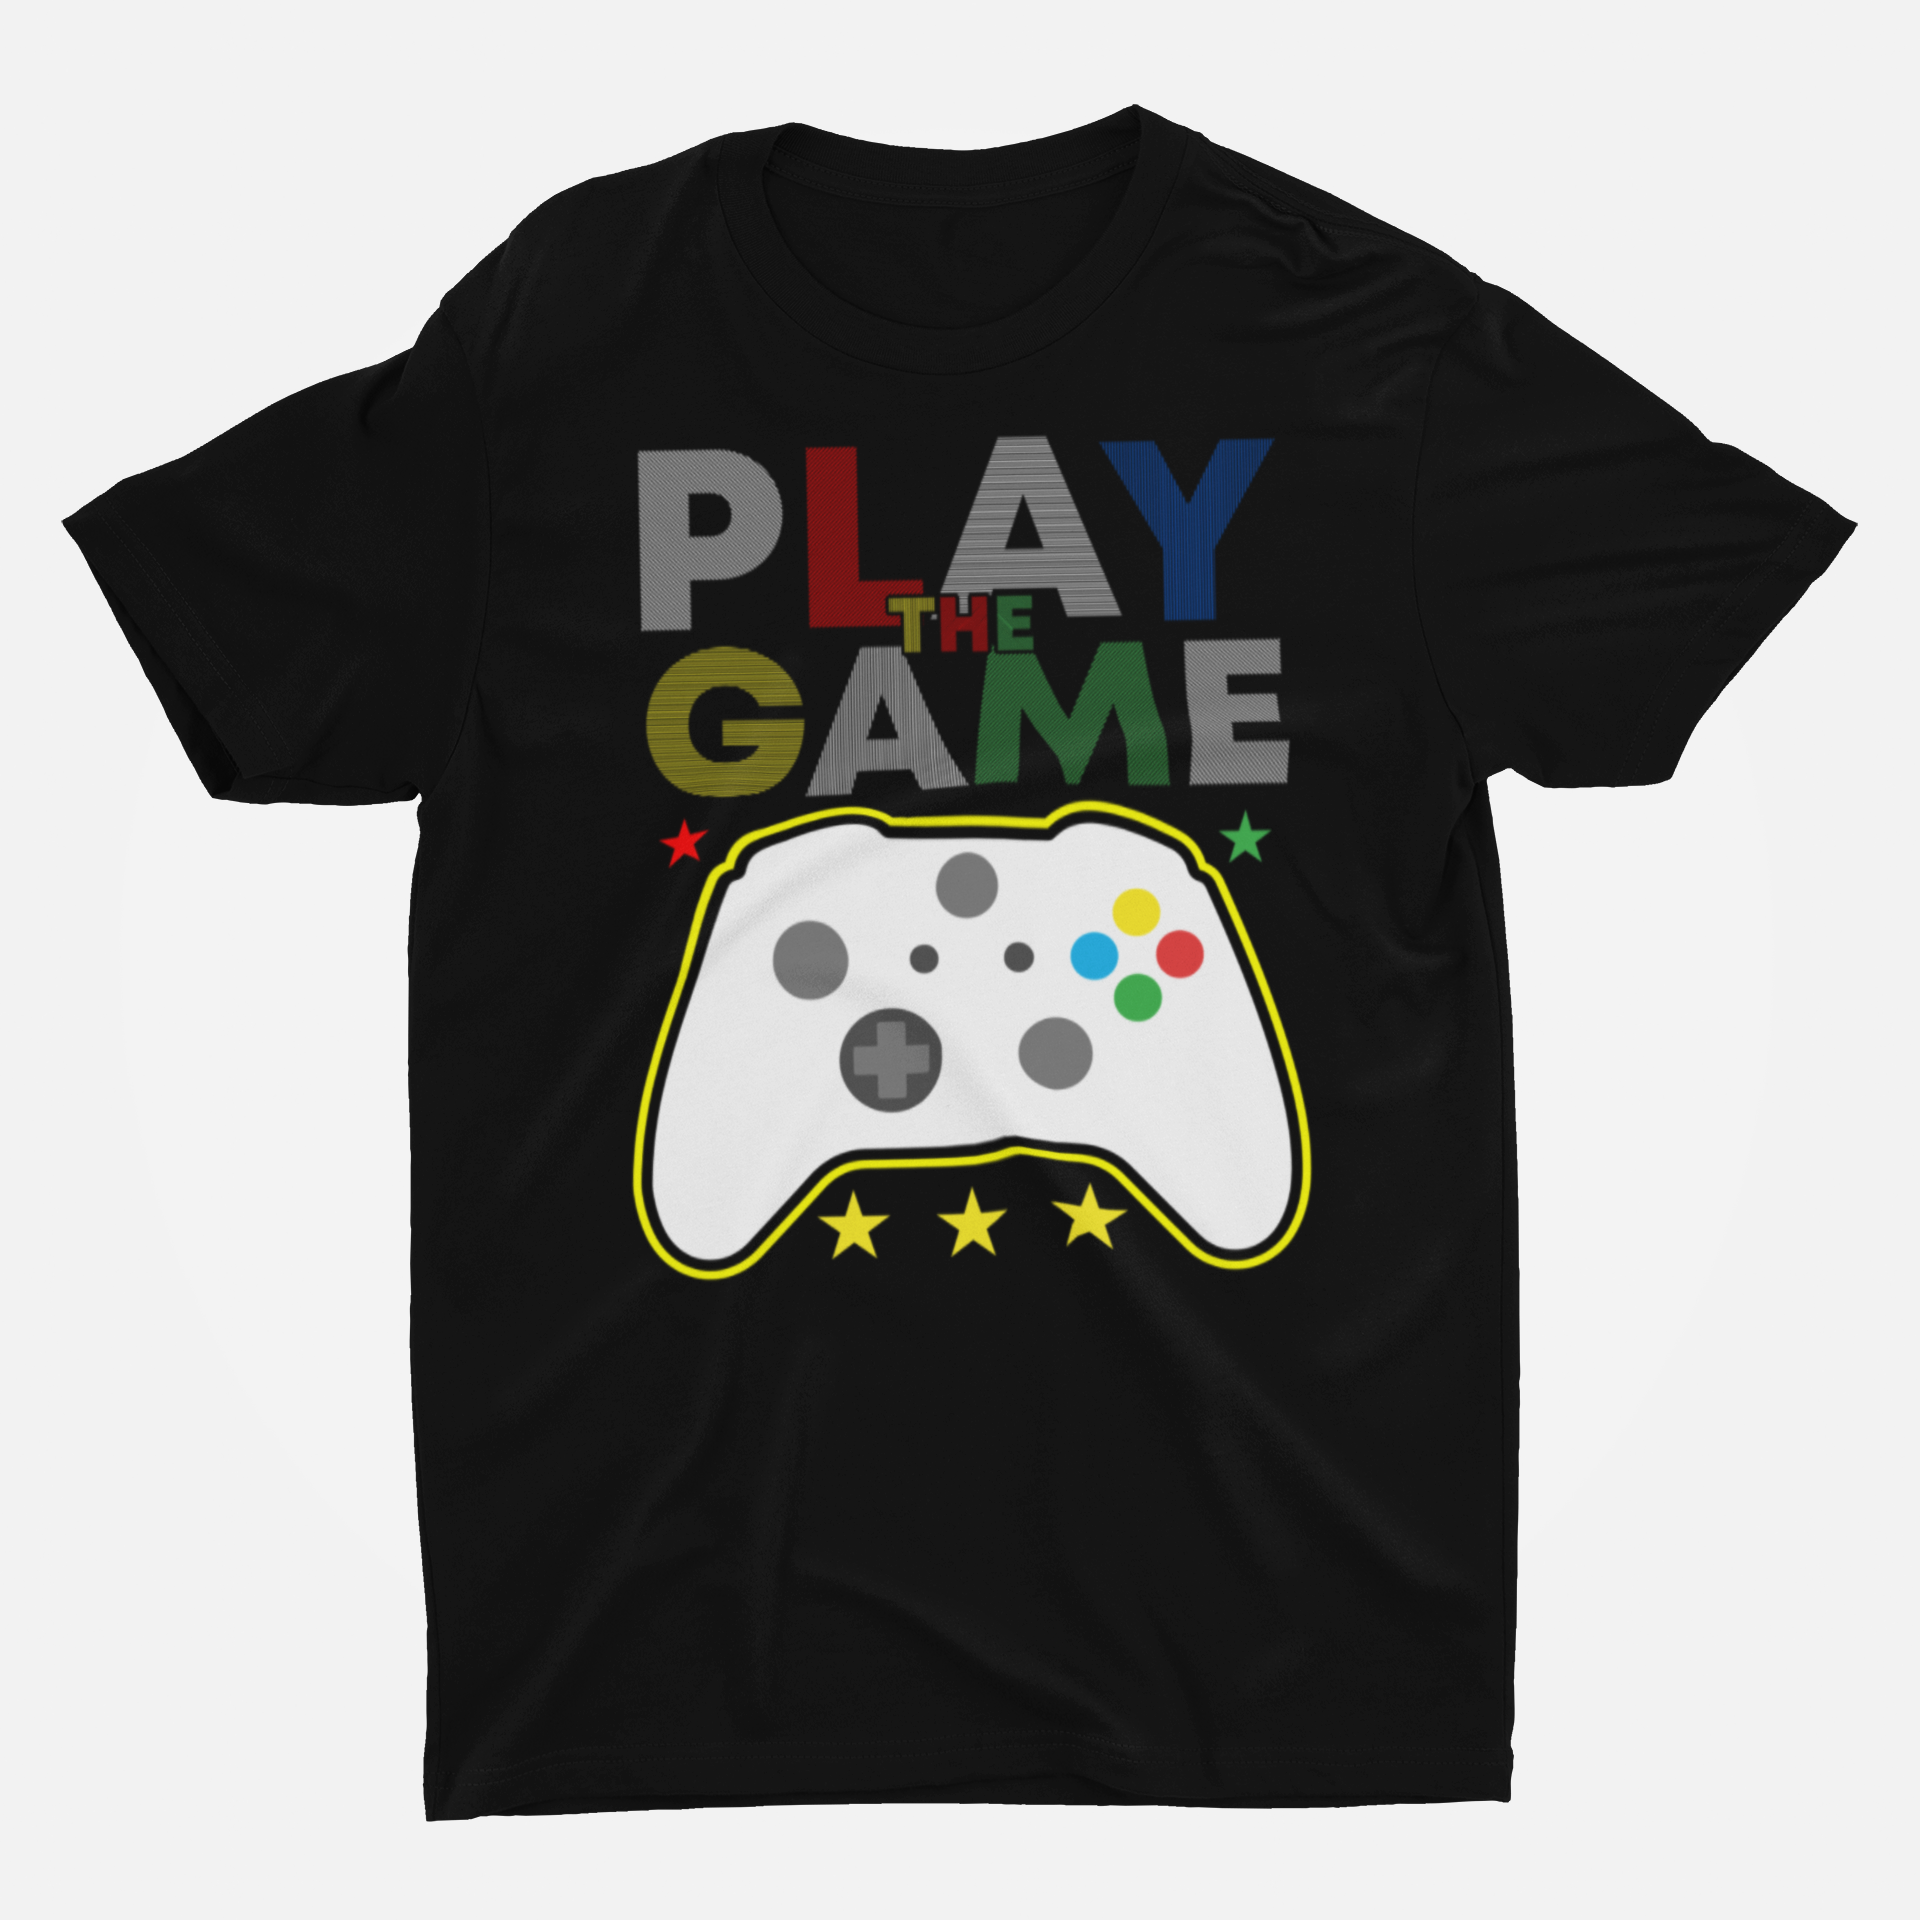 Play The Game Black Round Neck T-Shirt for Men